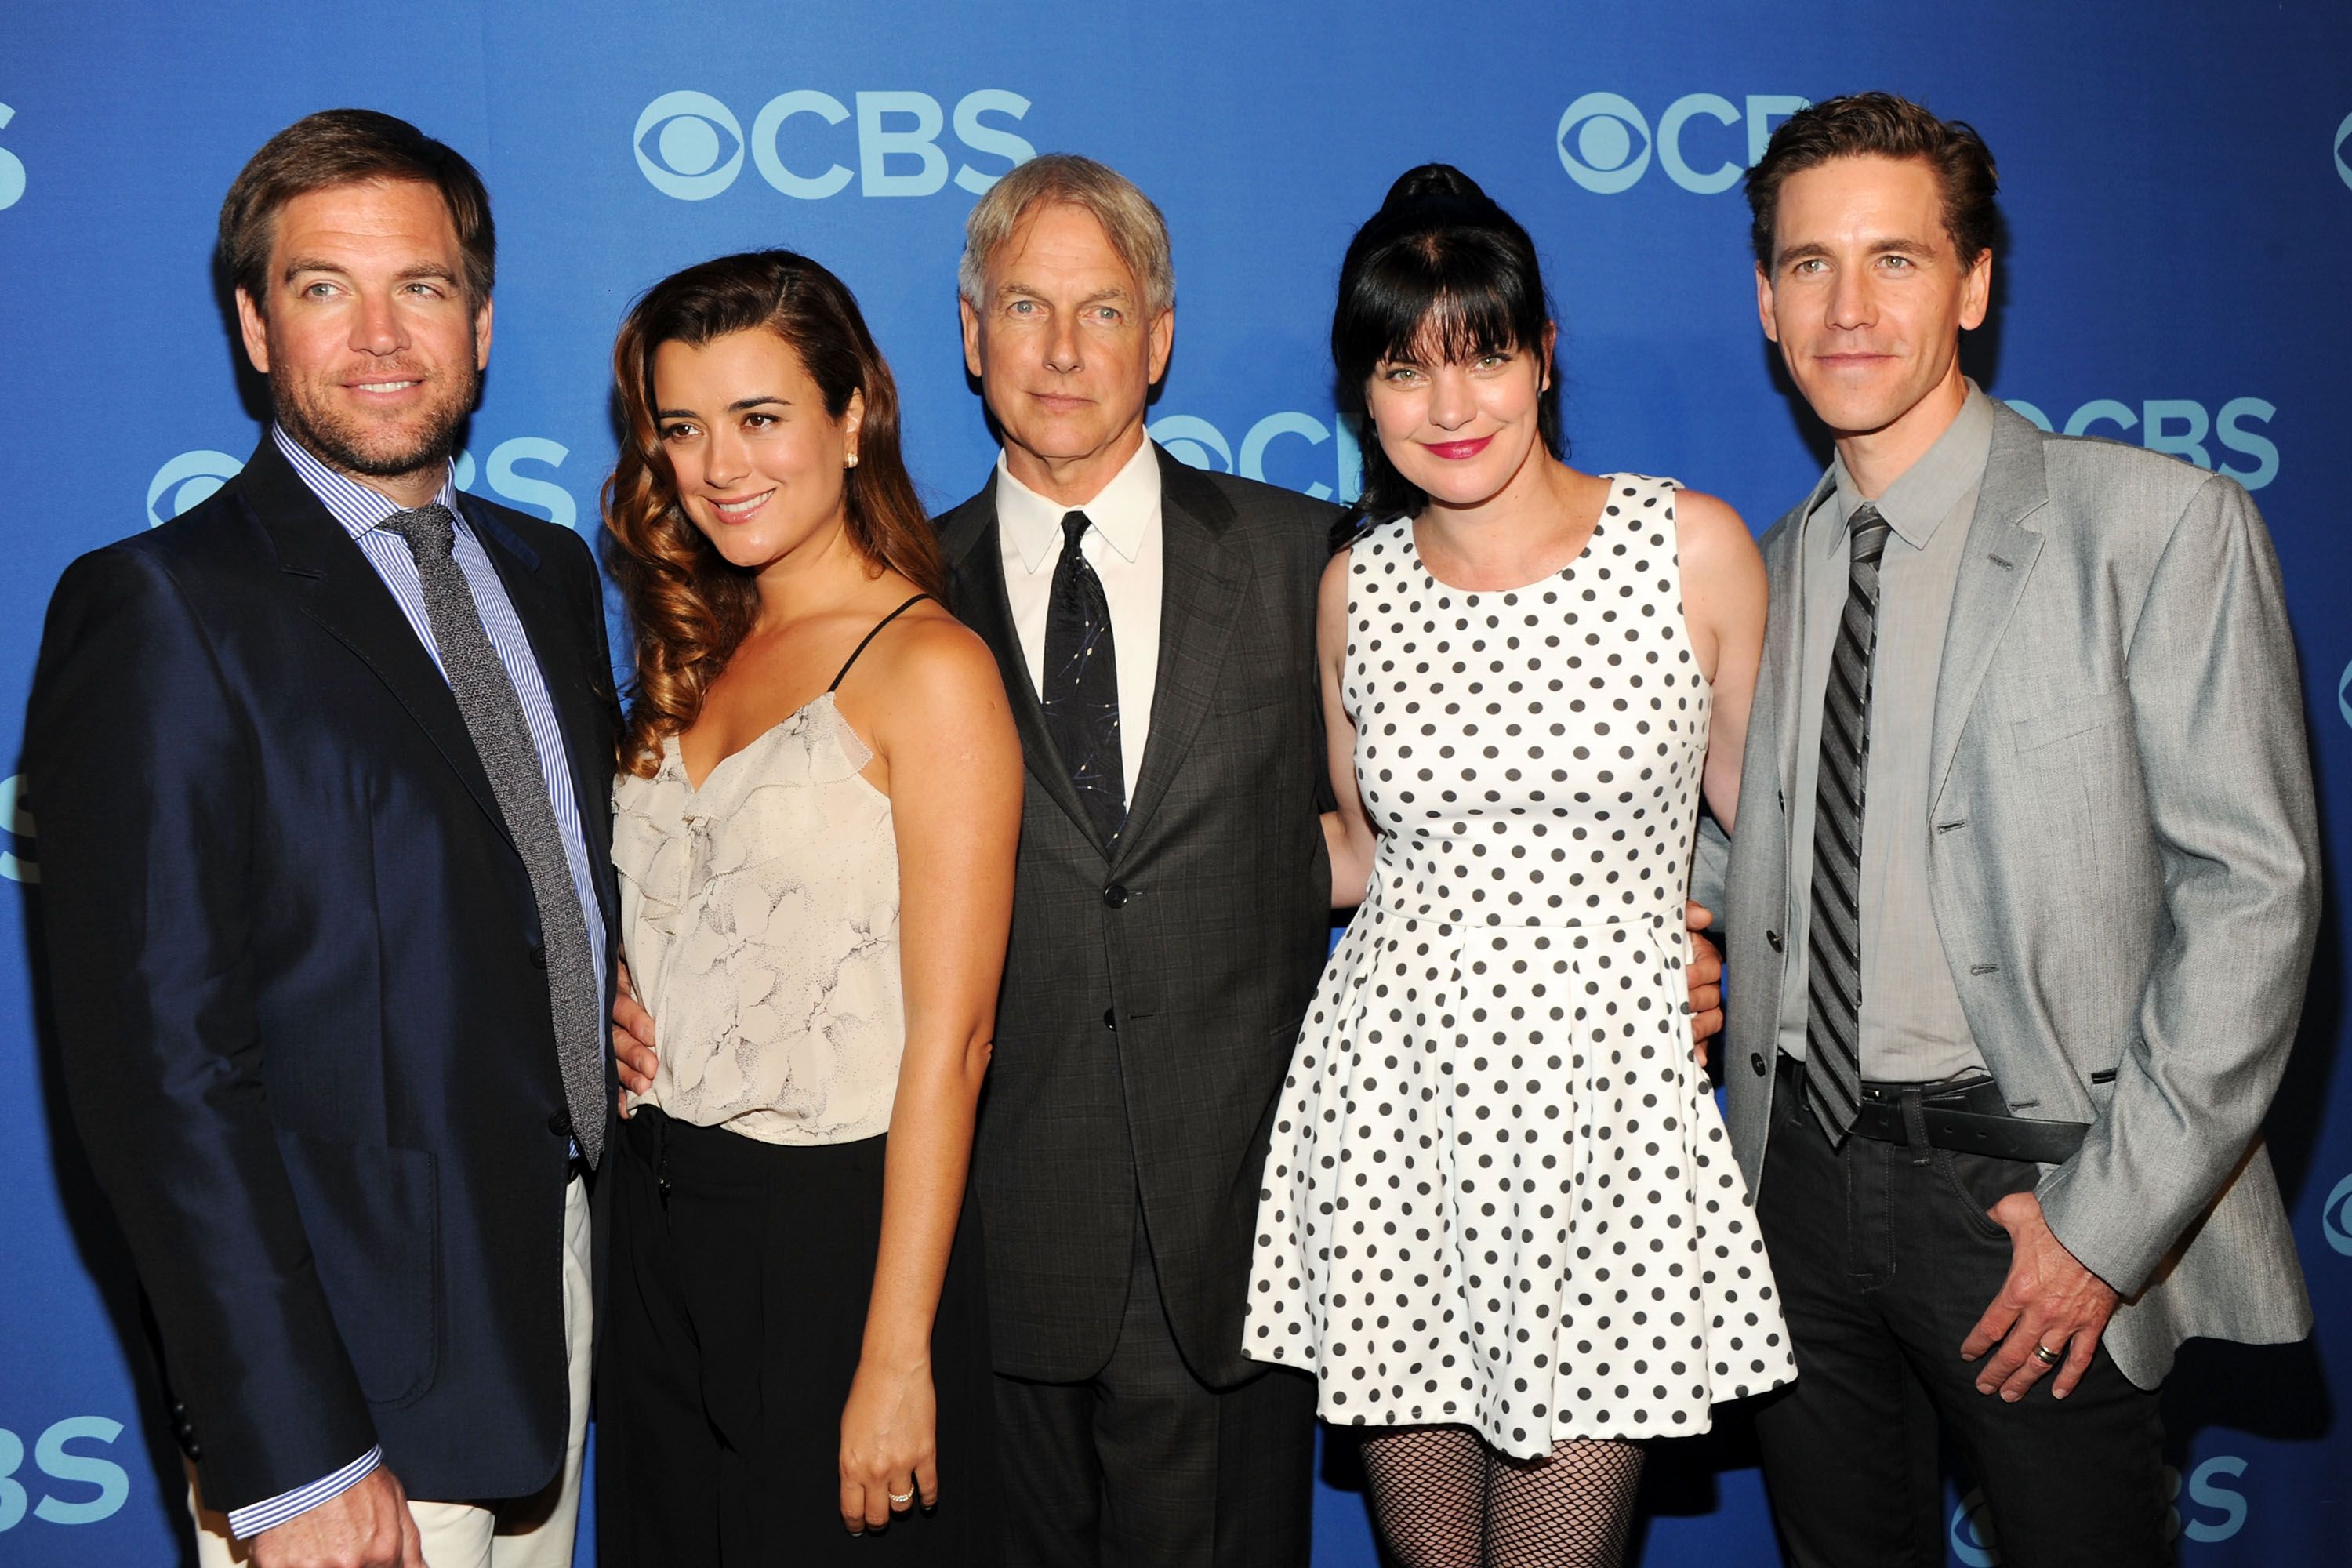 Michael Weatherly, Cote de Pablo, Mark Harmon, Pauley Perrette, and Brian Dietzen at CBS Upfront Presentation on May 15, 2013, in New York City | Photo: Ben Gabbe/Getty Images